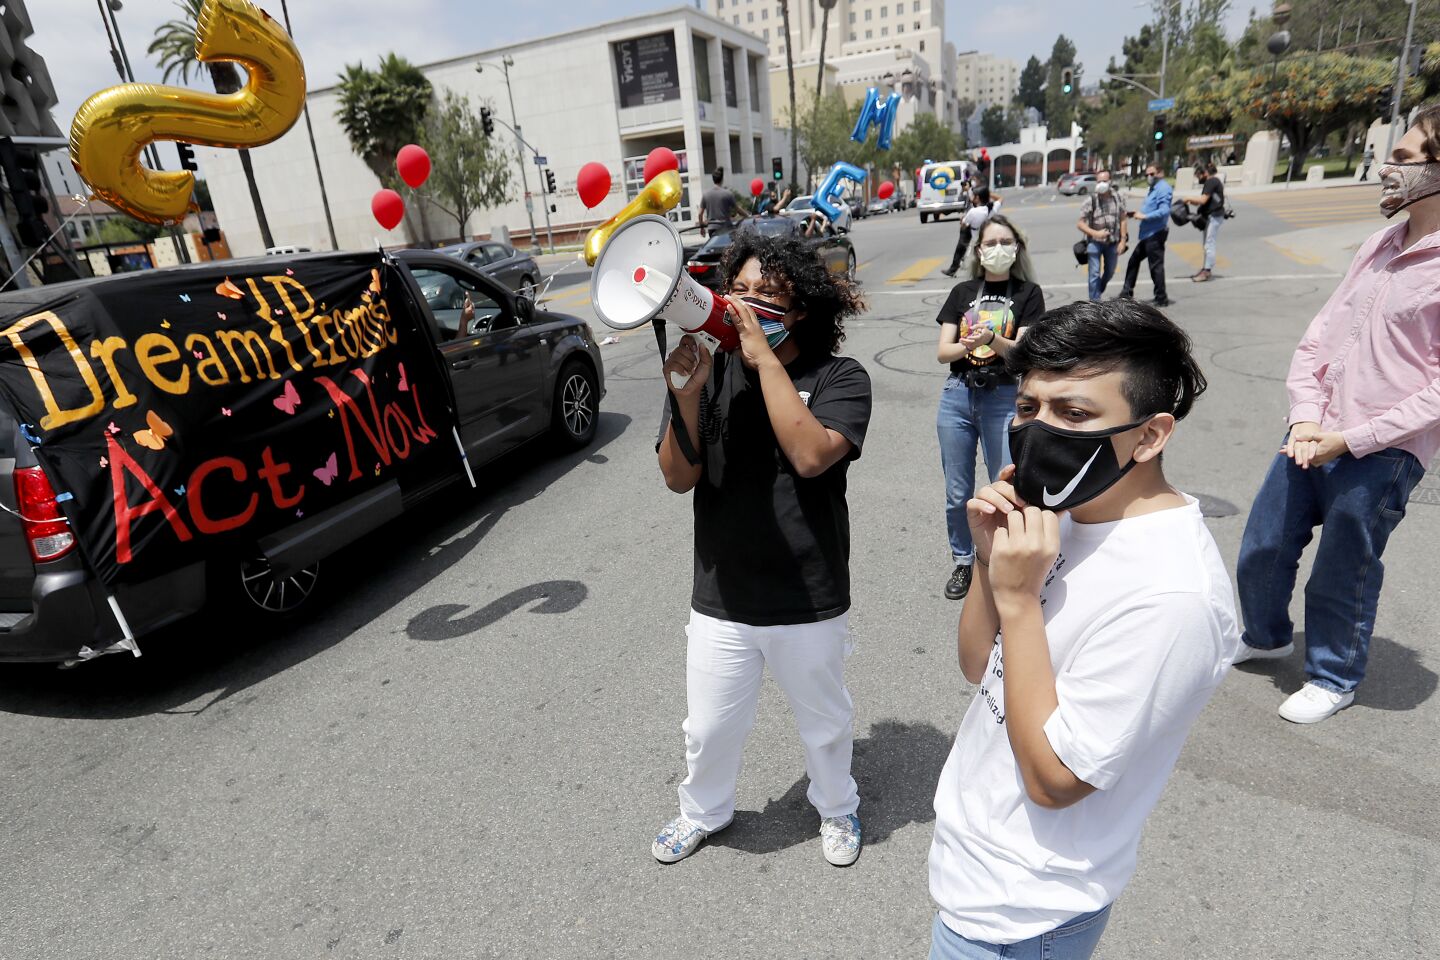 "Dreamers" and their supporters stage a celebratory car caravan around MacArthur Park in Los Angeles.